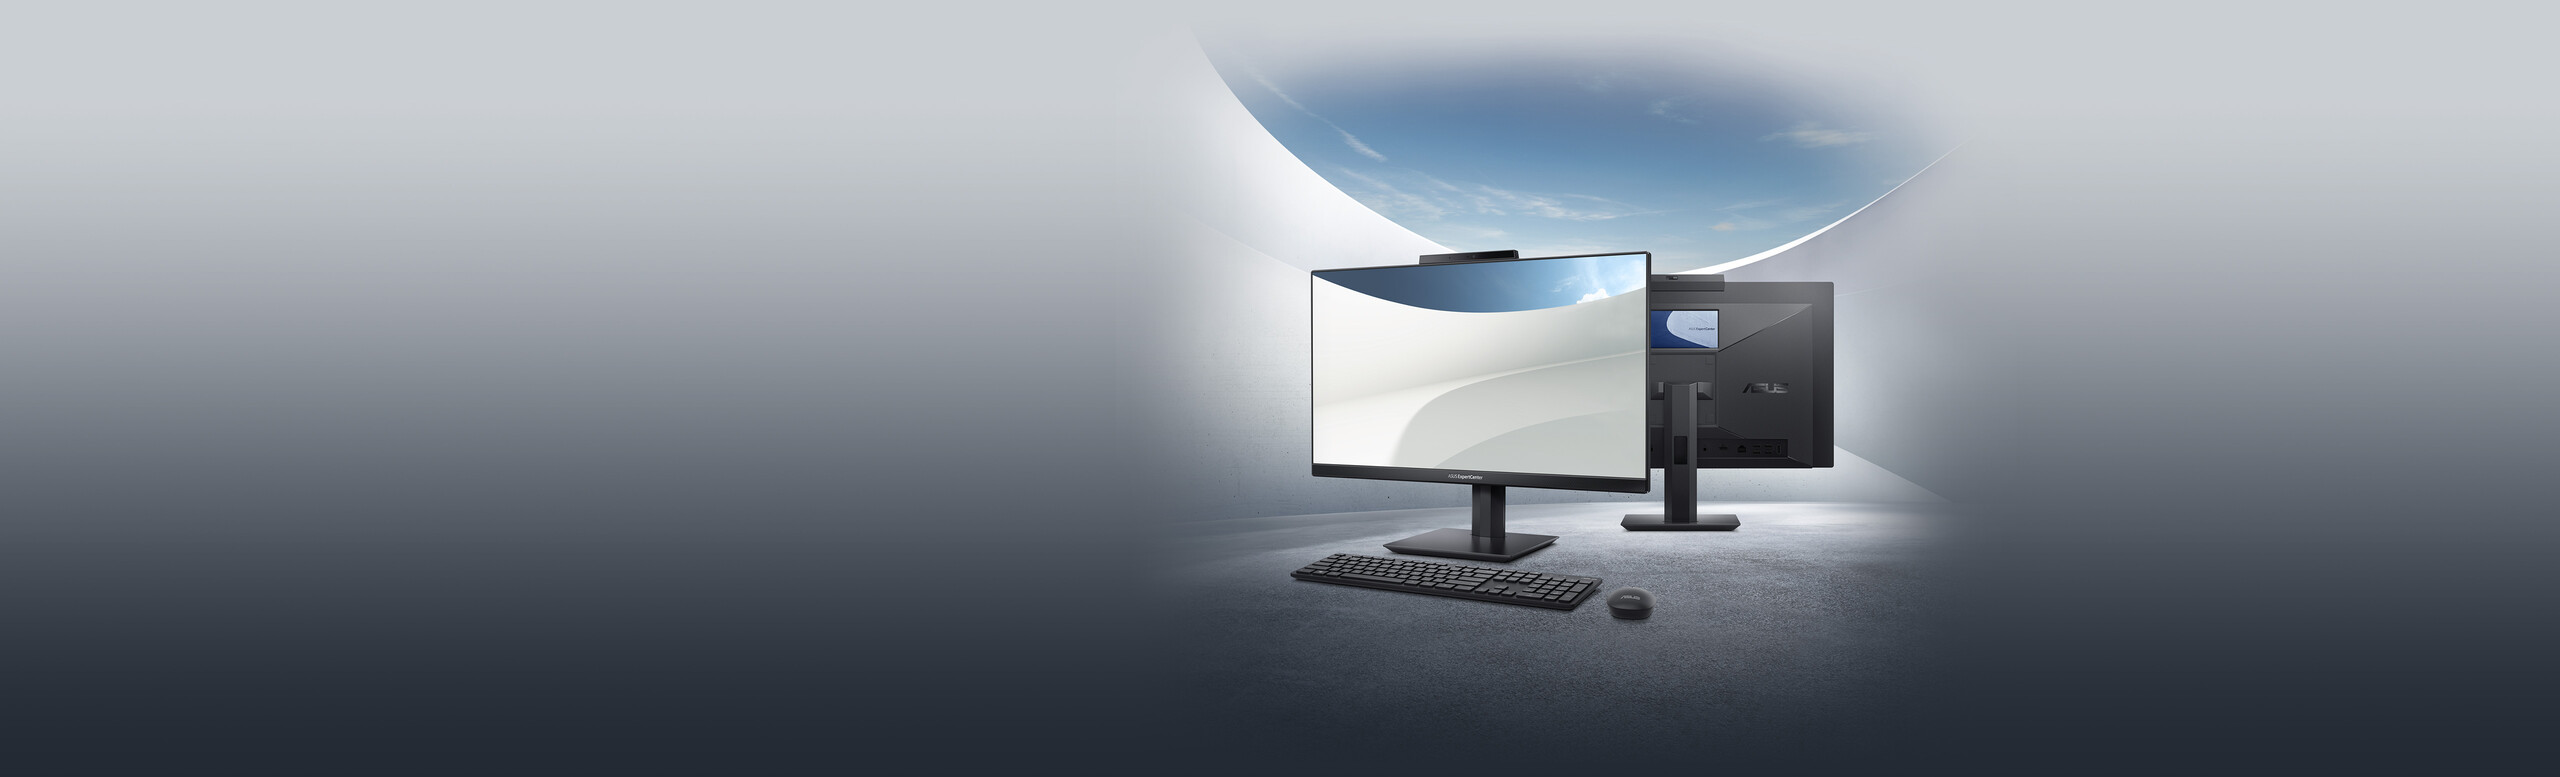 There are two ASUS ExpertCenter AiOs. One of the ASUS ExpertCenter AiO presents a screen with wallpaper in the front with an ASUS wireless keyboard and an ASUS wireless mouse. The other ASUS ExpertCenter AiO presents a customer-facing second screen on the back.